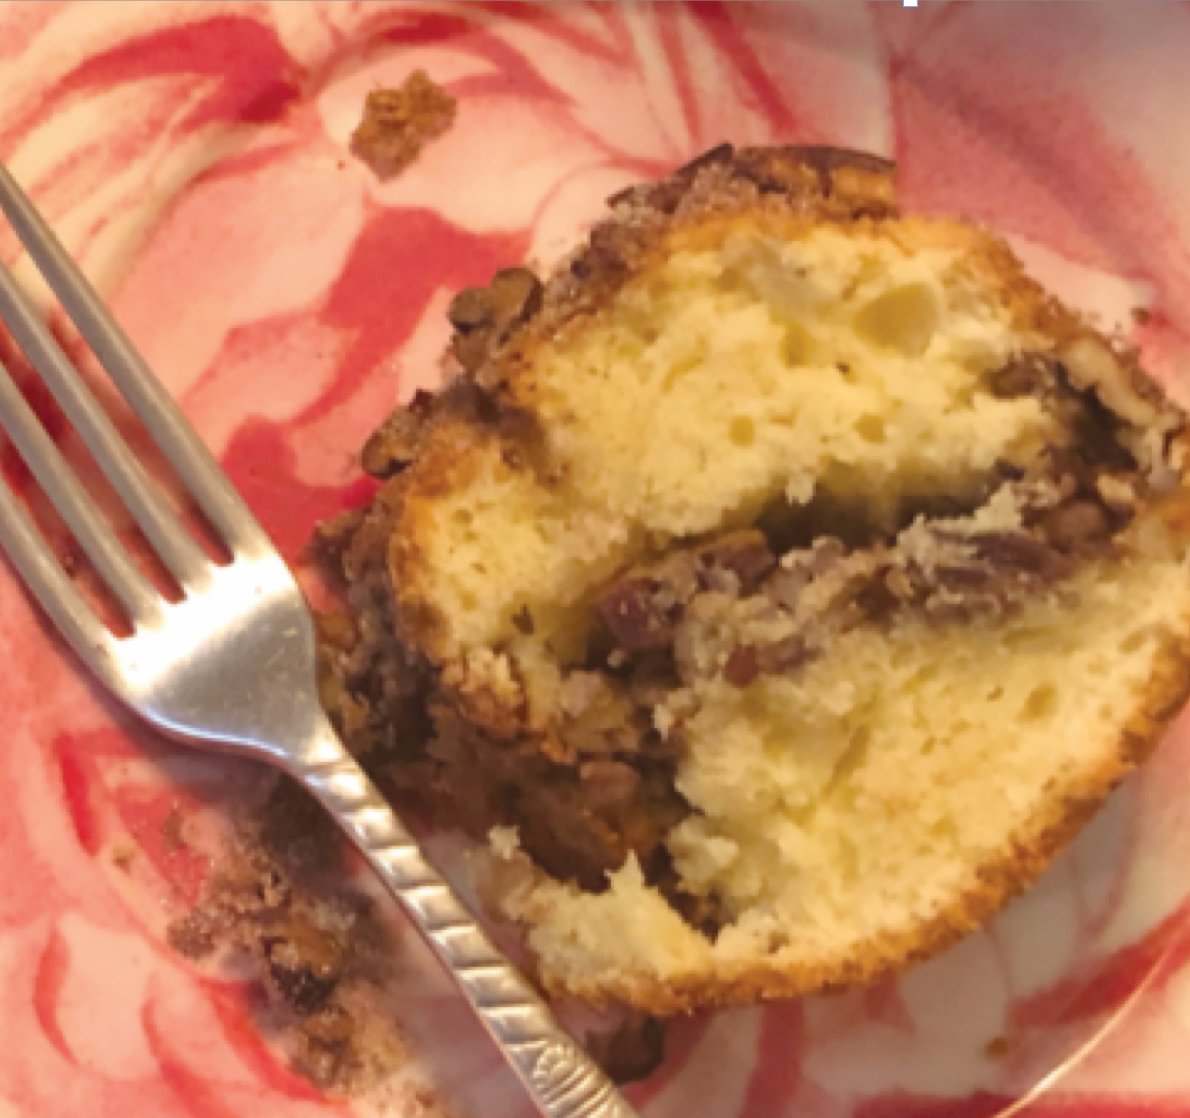 Coffee cake with streusel is packed with butter, sugar, sour cream and pecans, and worth every calorie.